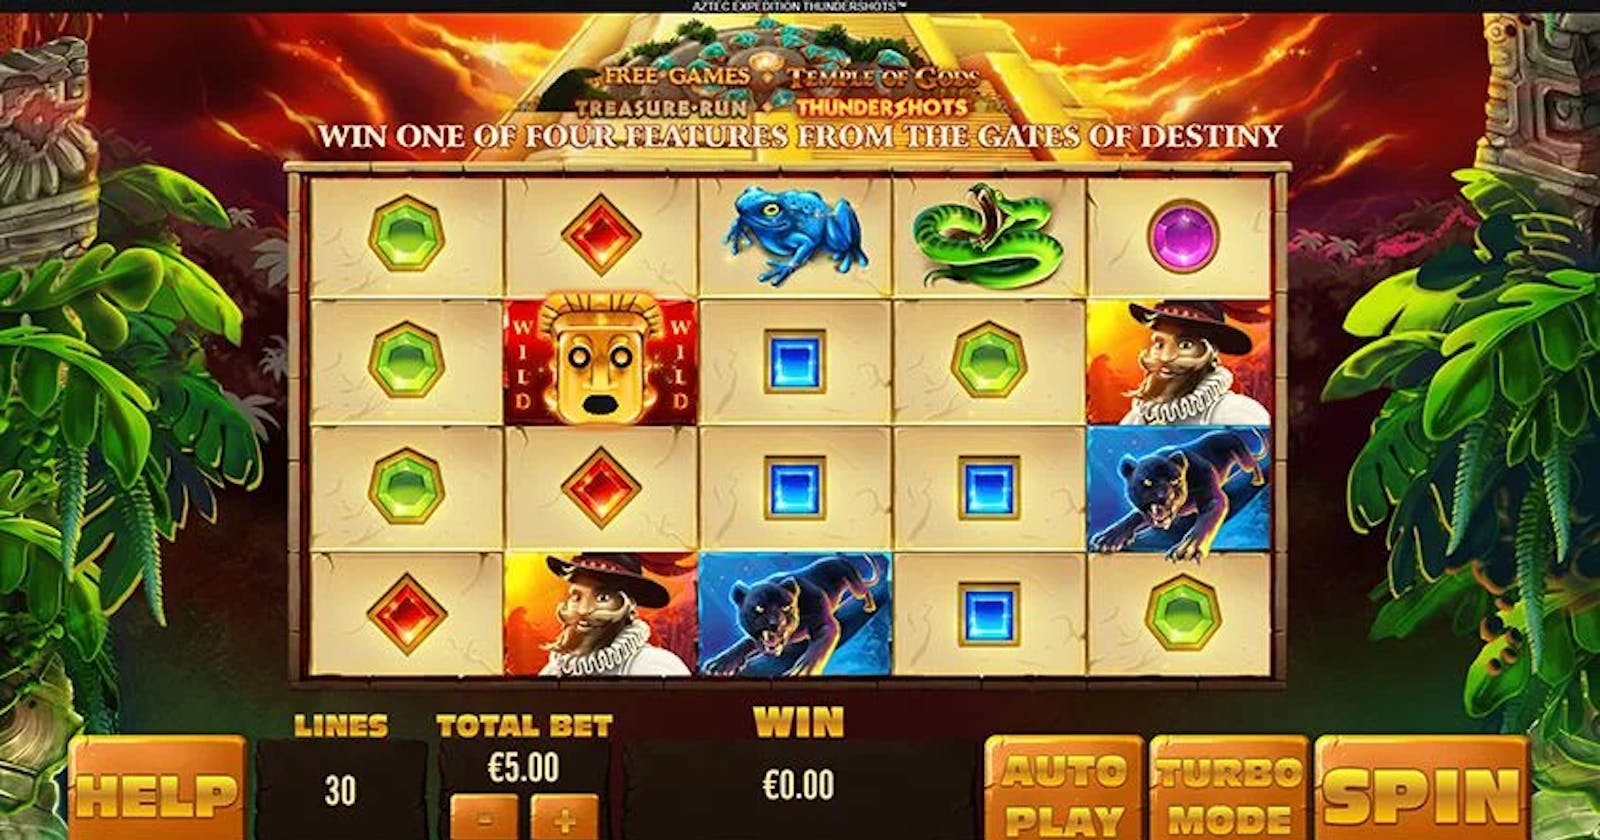 Aztec Expedition Thundershots slot: Theme, Features and Bonuses